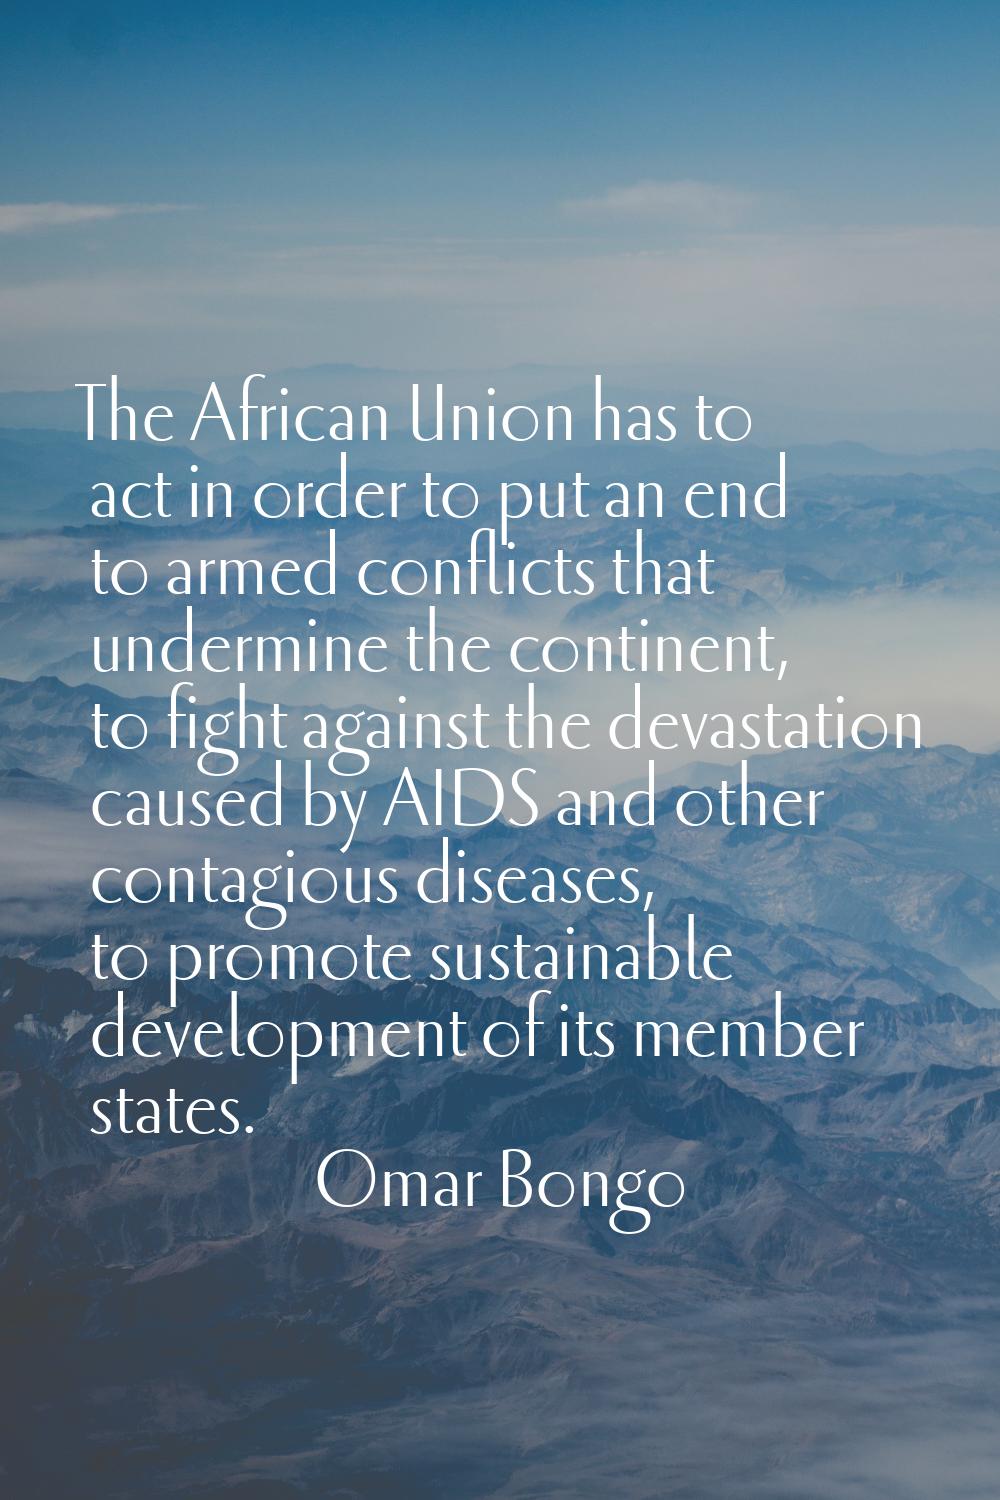 The African Union has to act in order to put an end to armed conflicts that undermine the continent